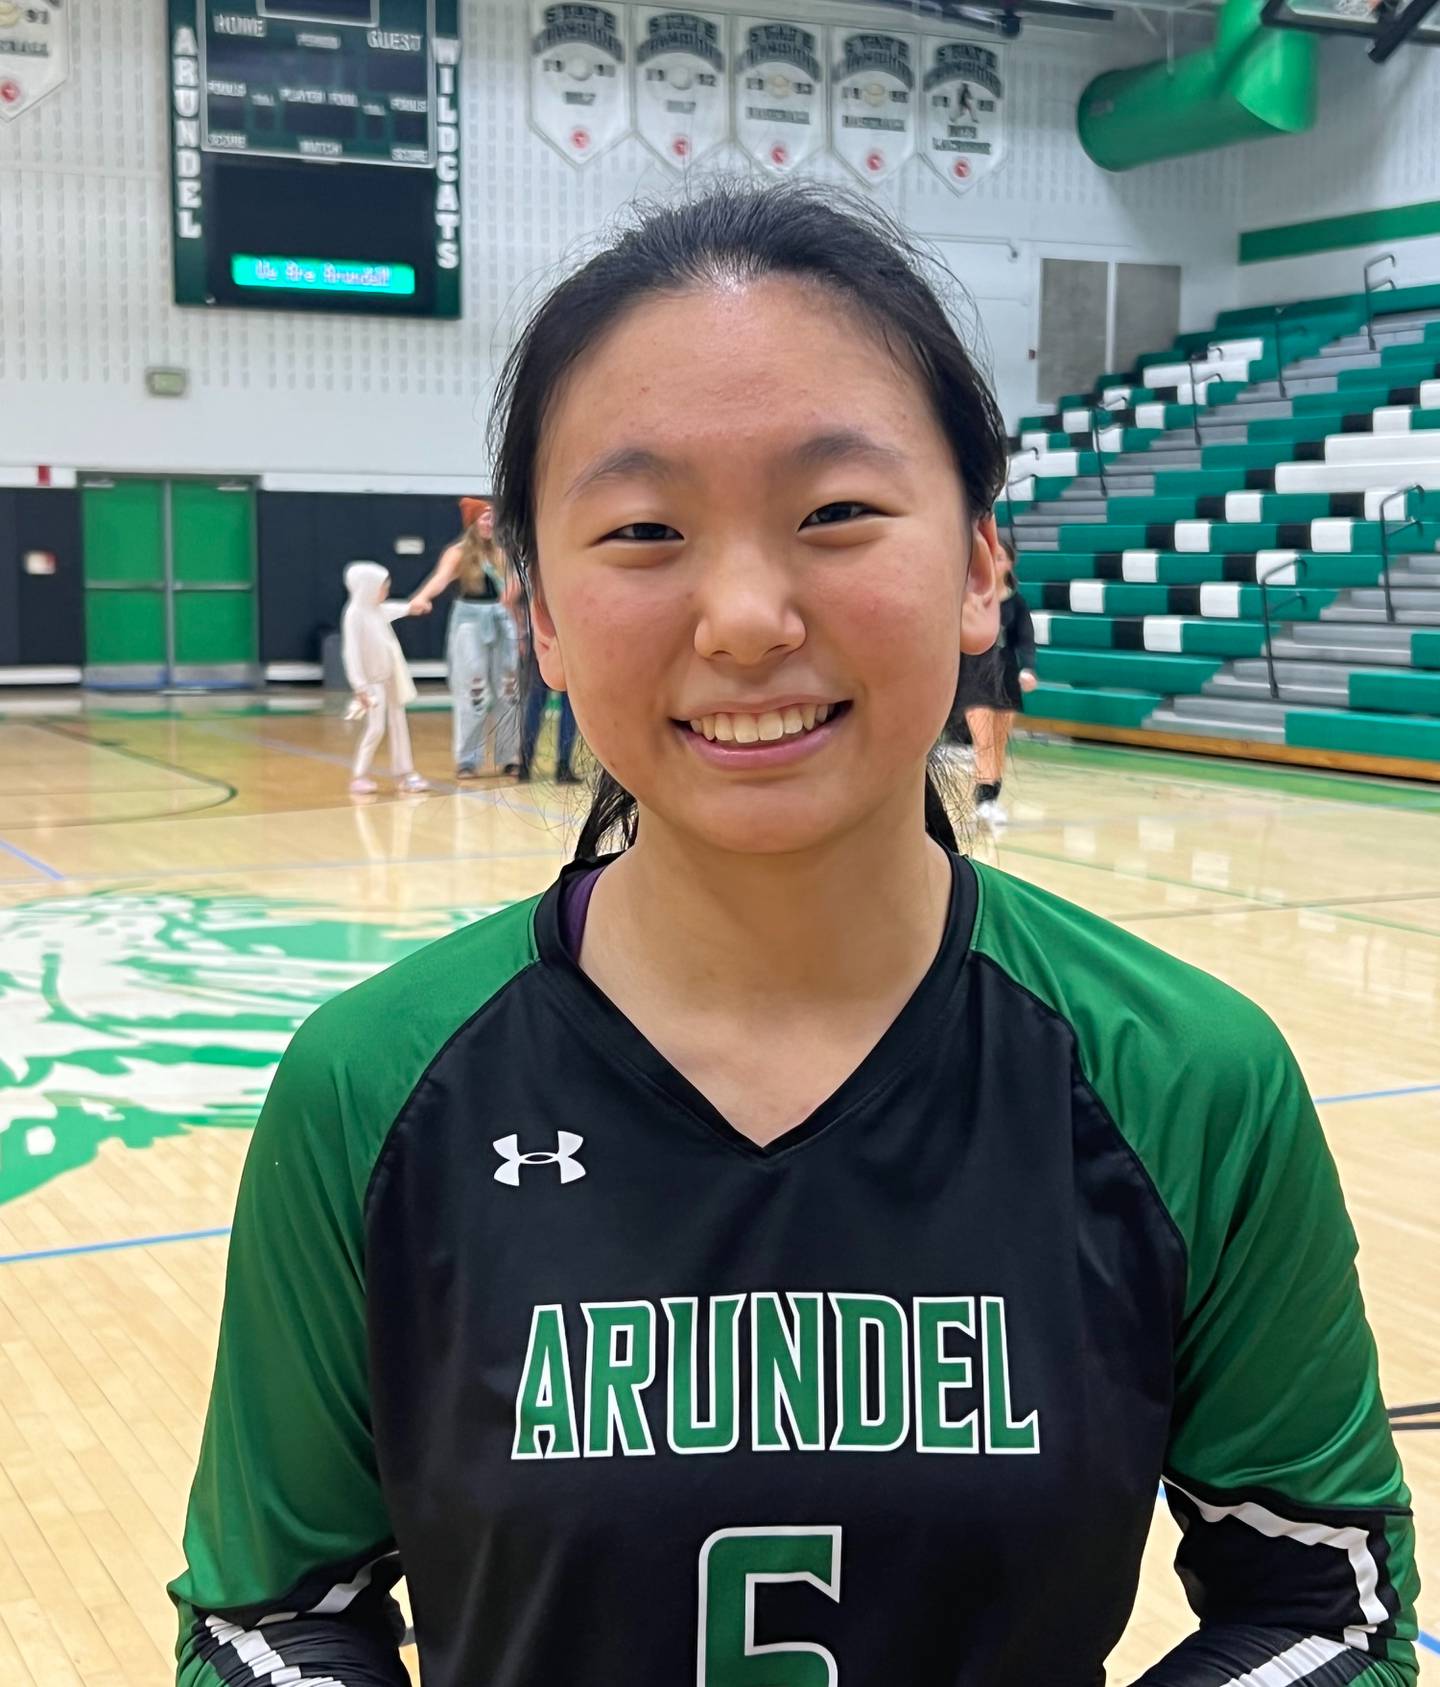 Senior setter Emily Liu was a driving force for Arundel volleyball Thursday evening. The top-ranked Wildcats swept visiting and No. 4 Broadneck in an Anne Arundel County match.